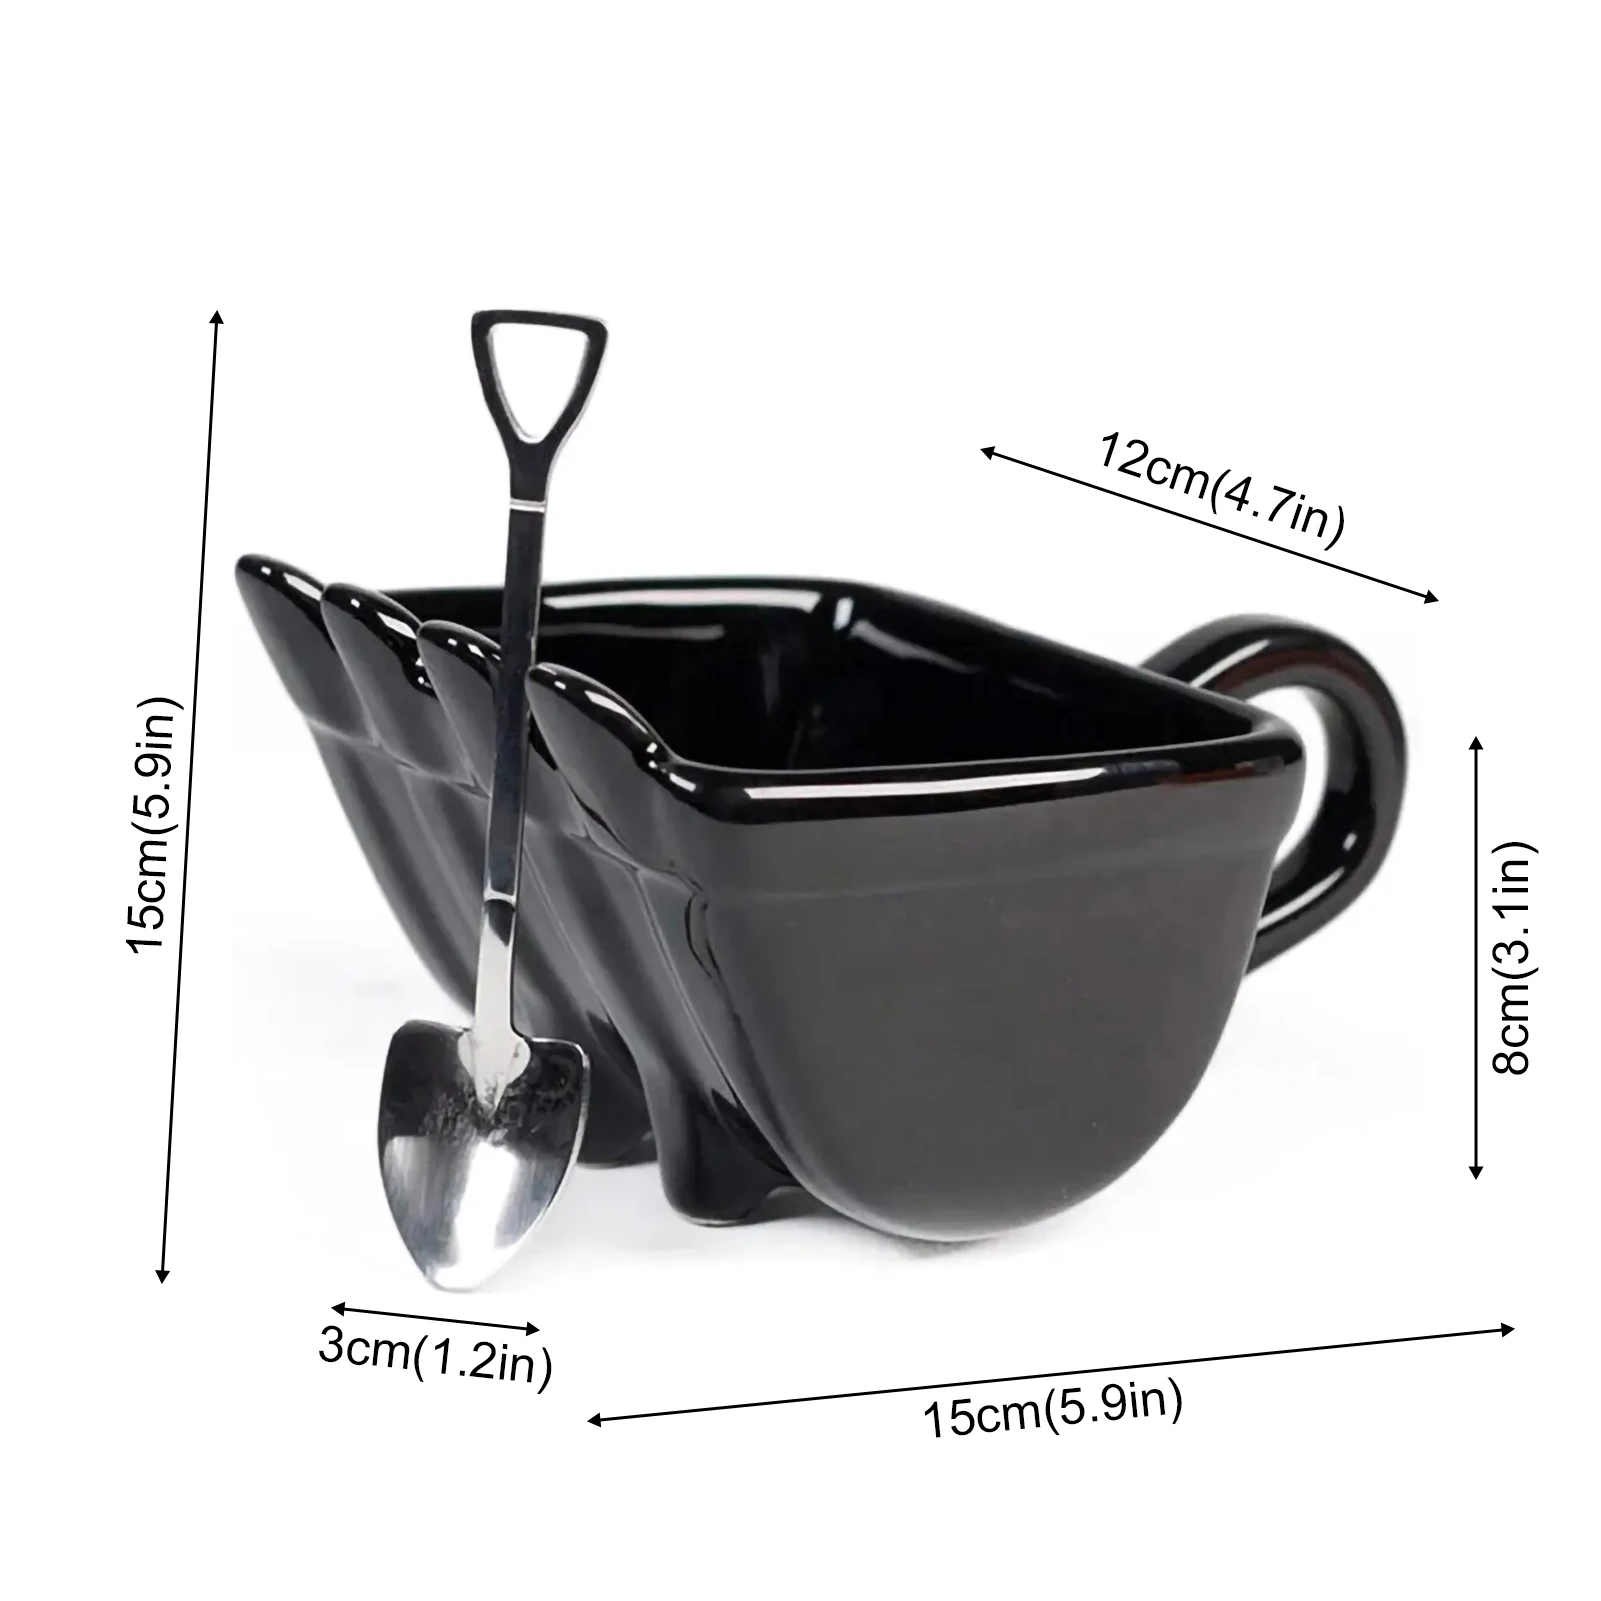 Creative 3D Excavator Bucket Model Cafe Coffee Mug With Spade Shovel Spoon Funny Digger Ashtray Cake Container Tea Cup images - 6